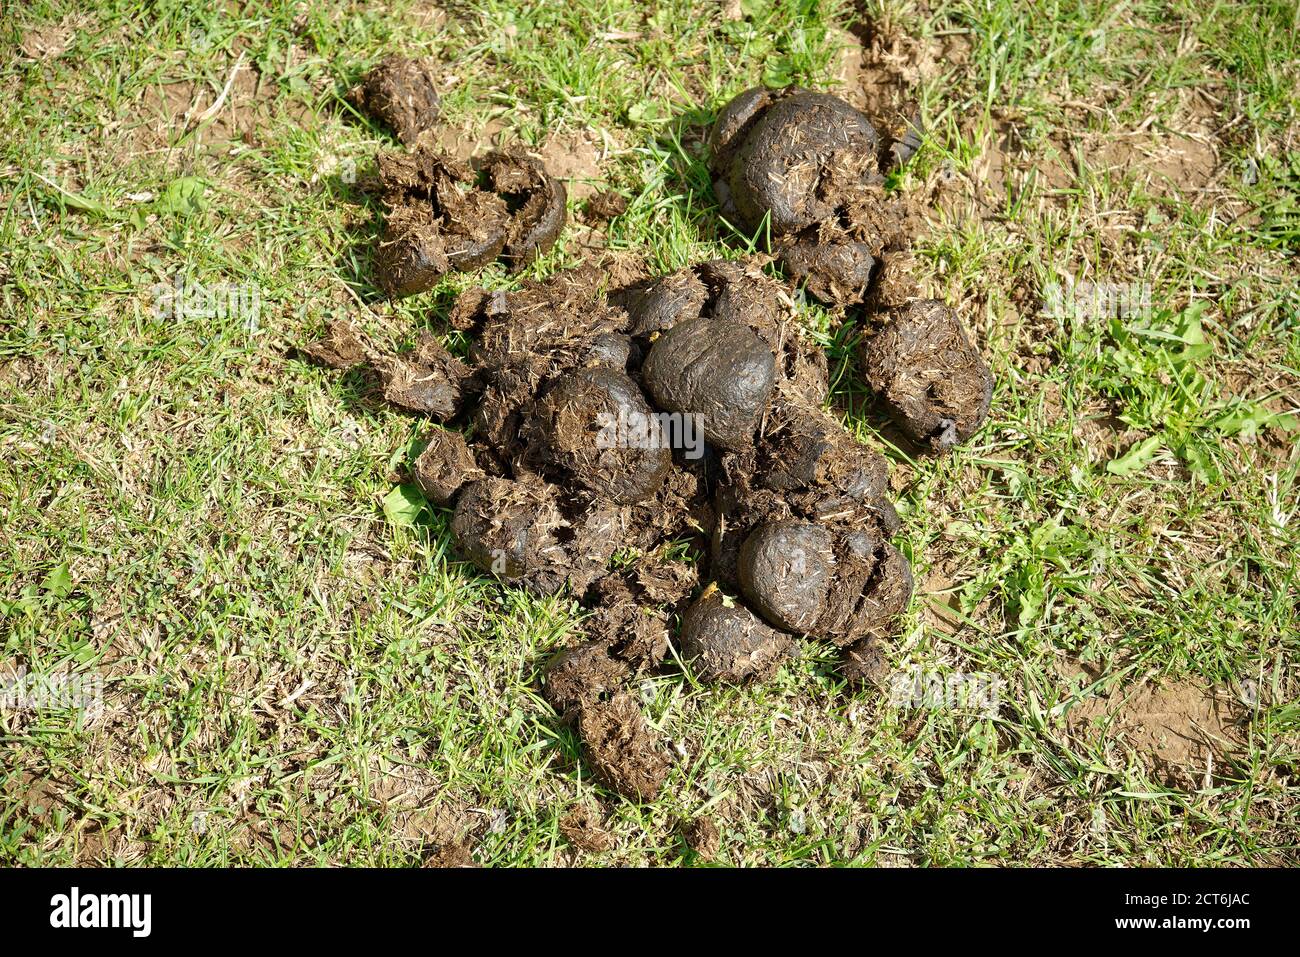 Horse faeces or horse droppings, or horse pooh. Stock Photo